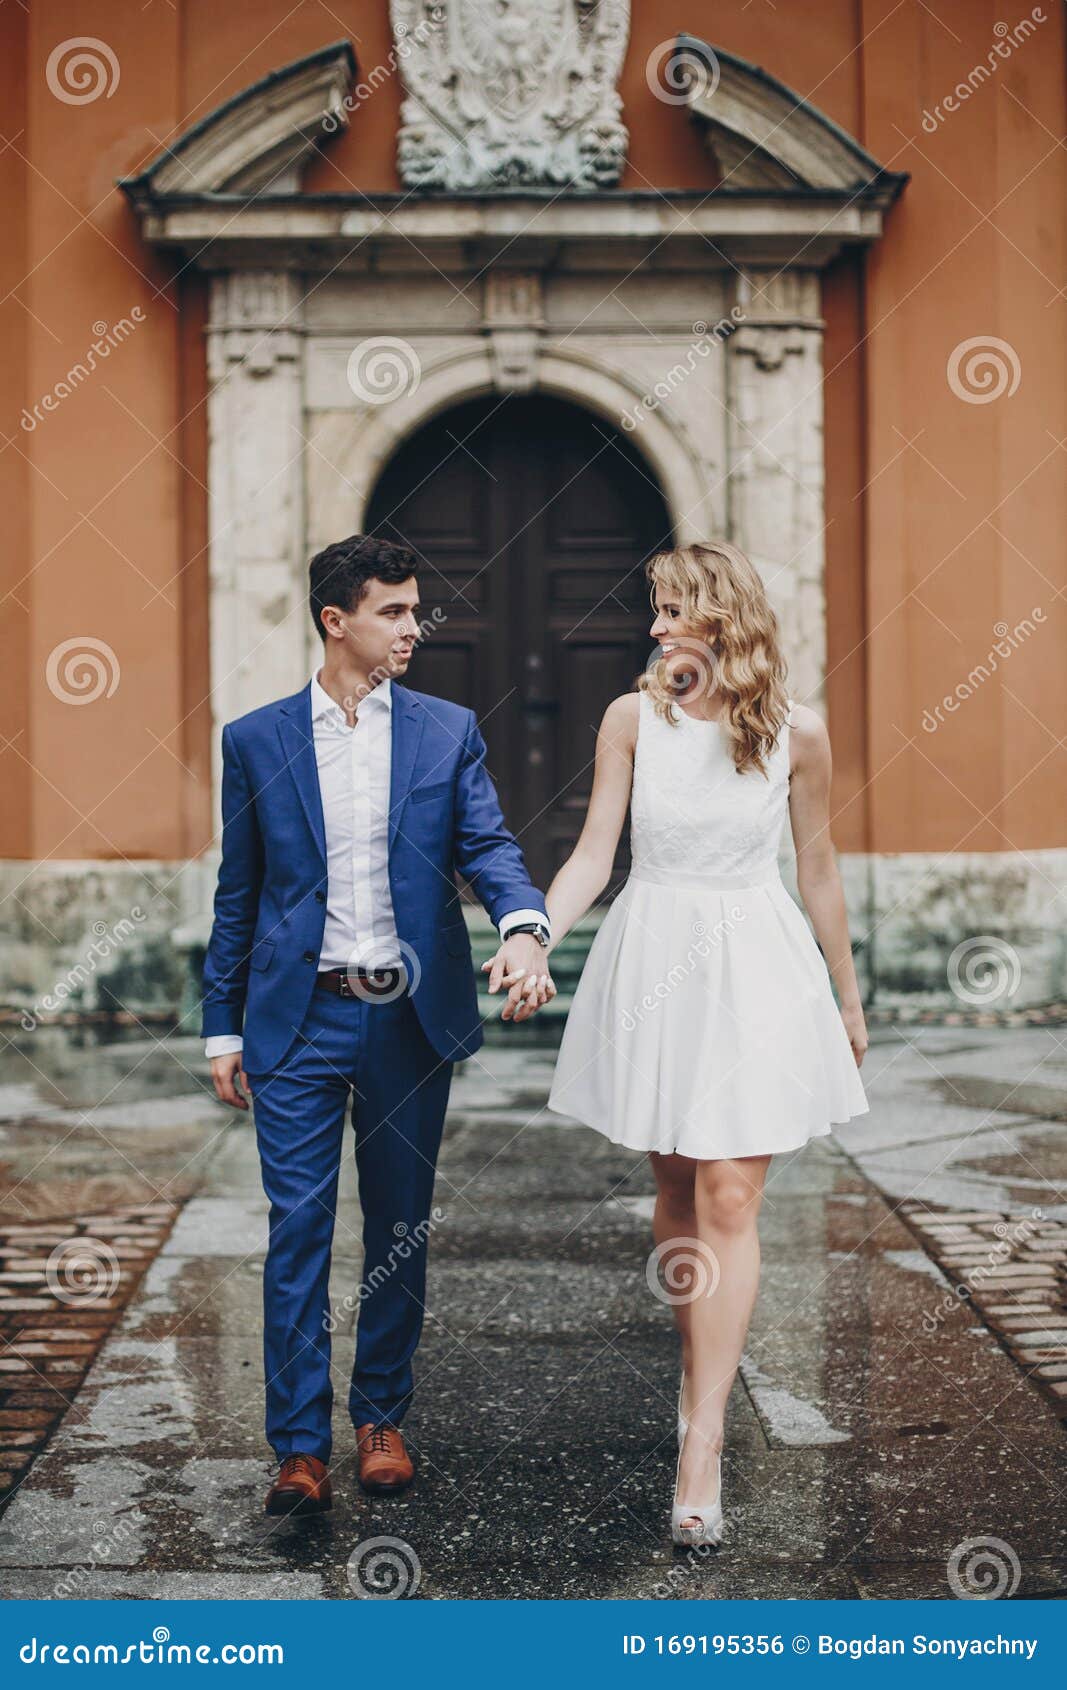 Stylish Couple Walking Together in European City Street on ...